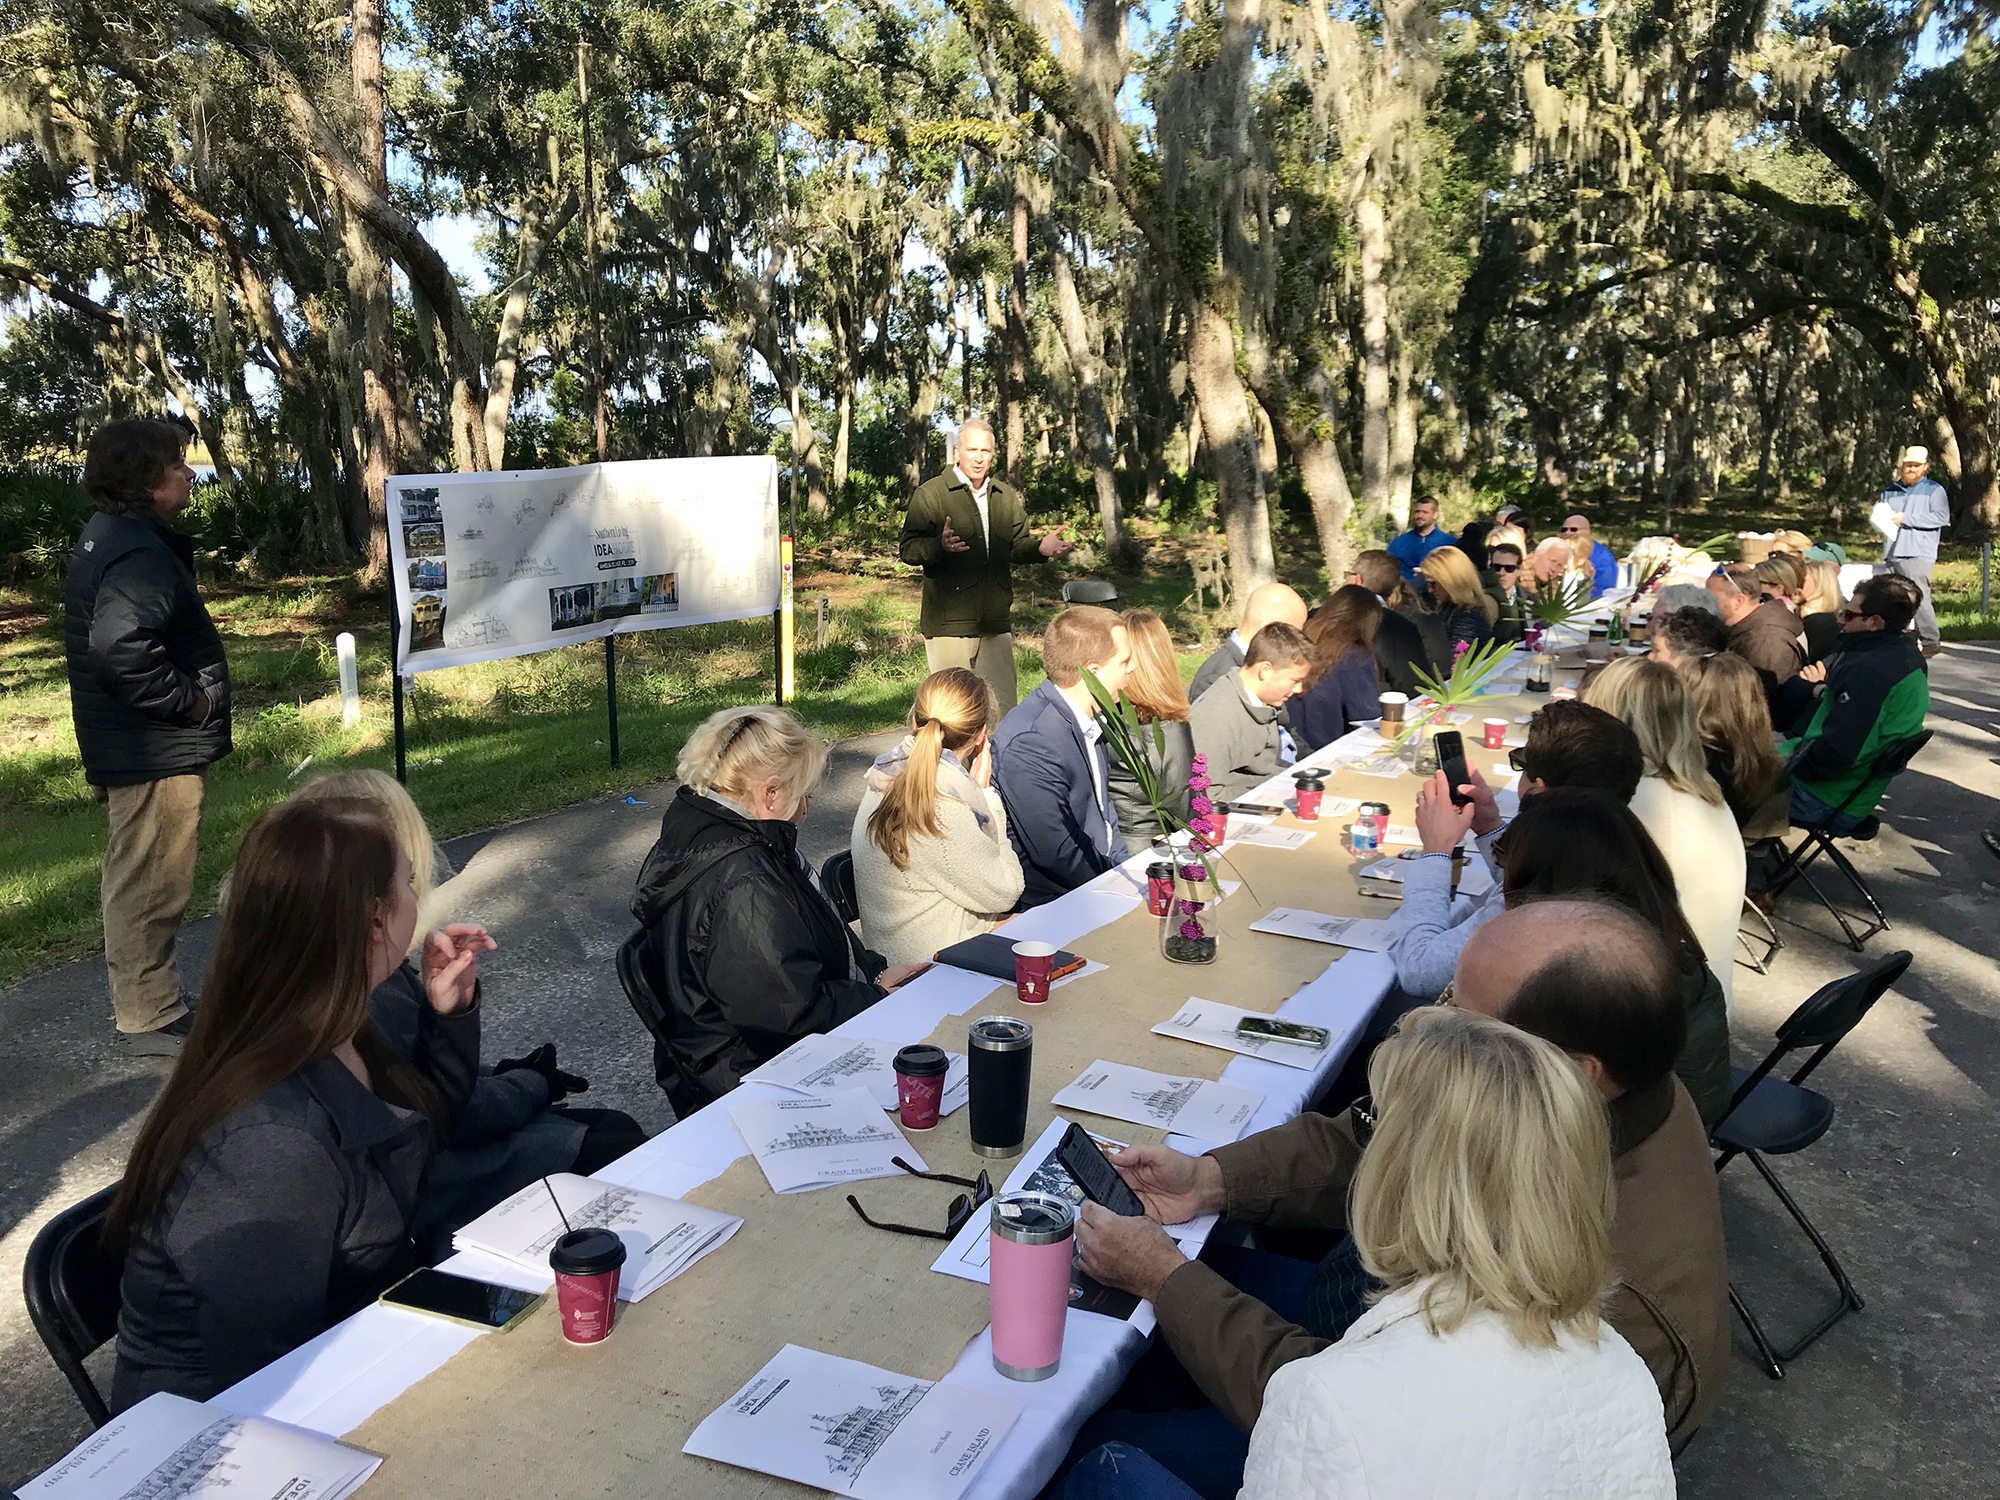 One of the 113 lots in the planned Crane Island development was selected for a model home for Southern Living magazine. Jacksonville homebuilder Riverside Homes was selected to construct the house. 